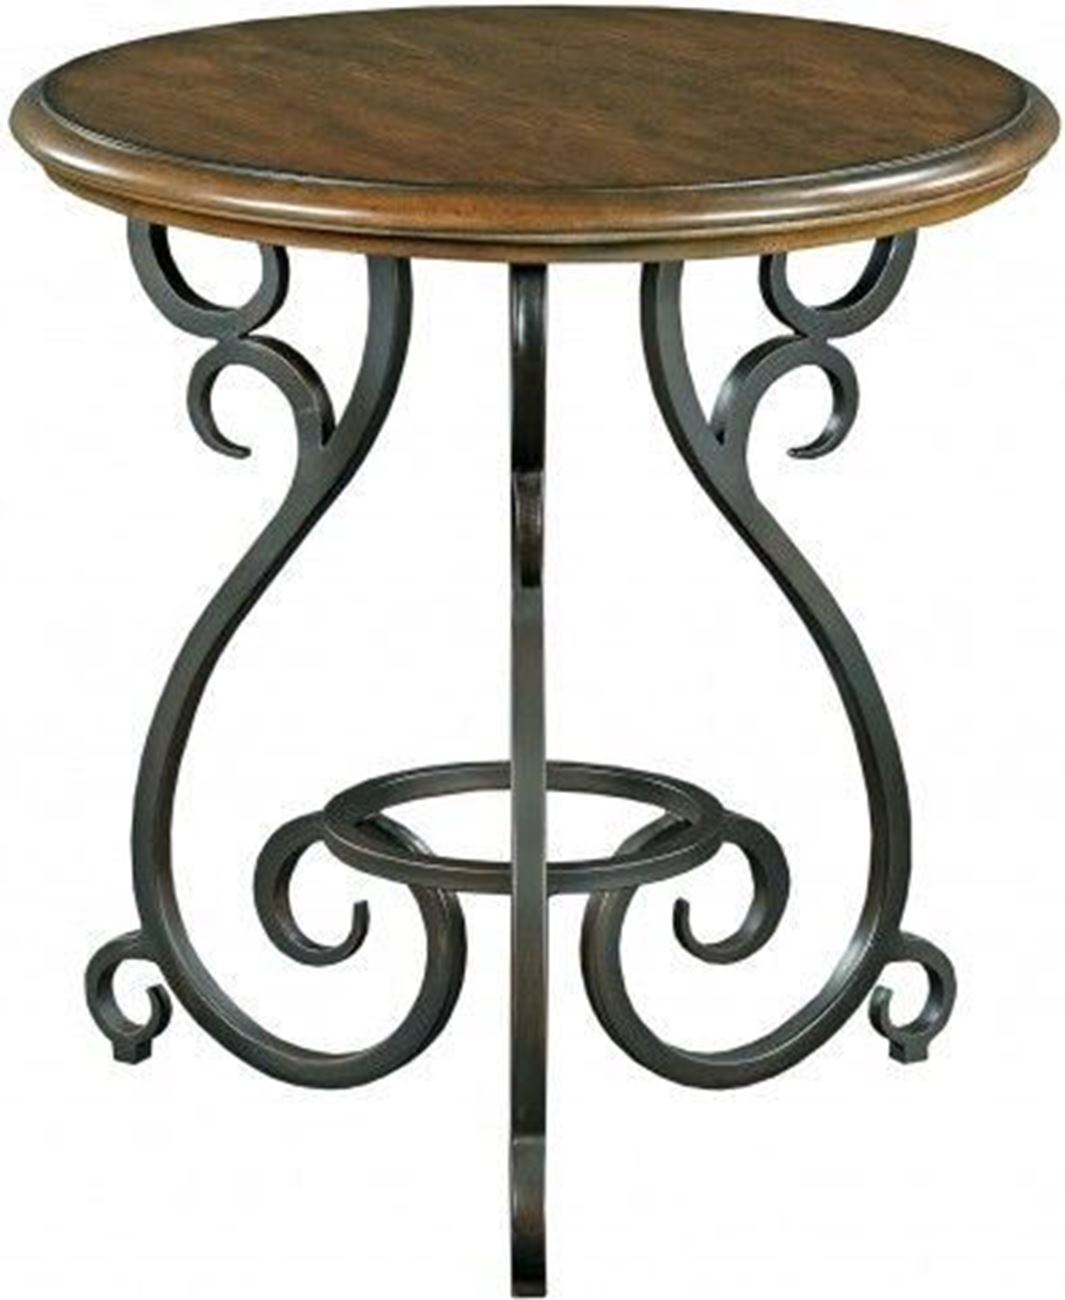 portolone accent table metal base woodstock furniture dining room ture distressed side unique outdoor tables bathroom clock quilted runner patterns decorative accents for living